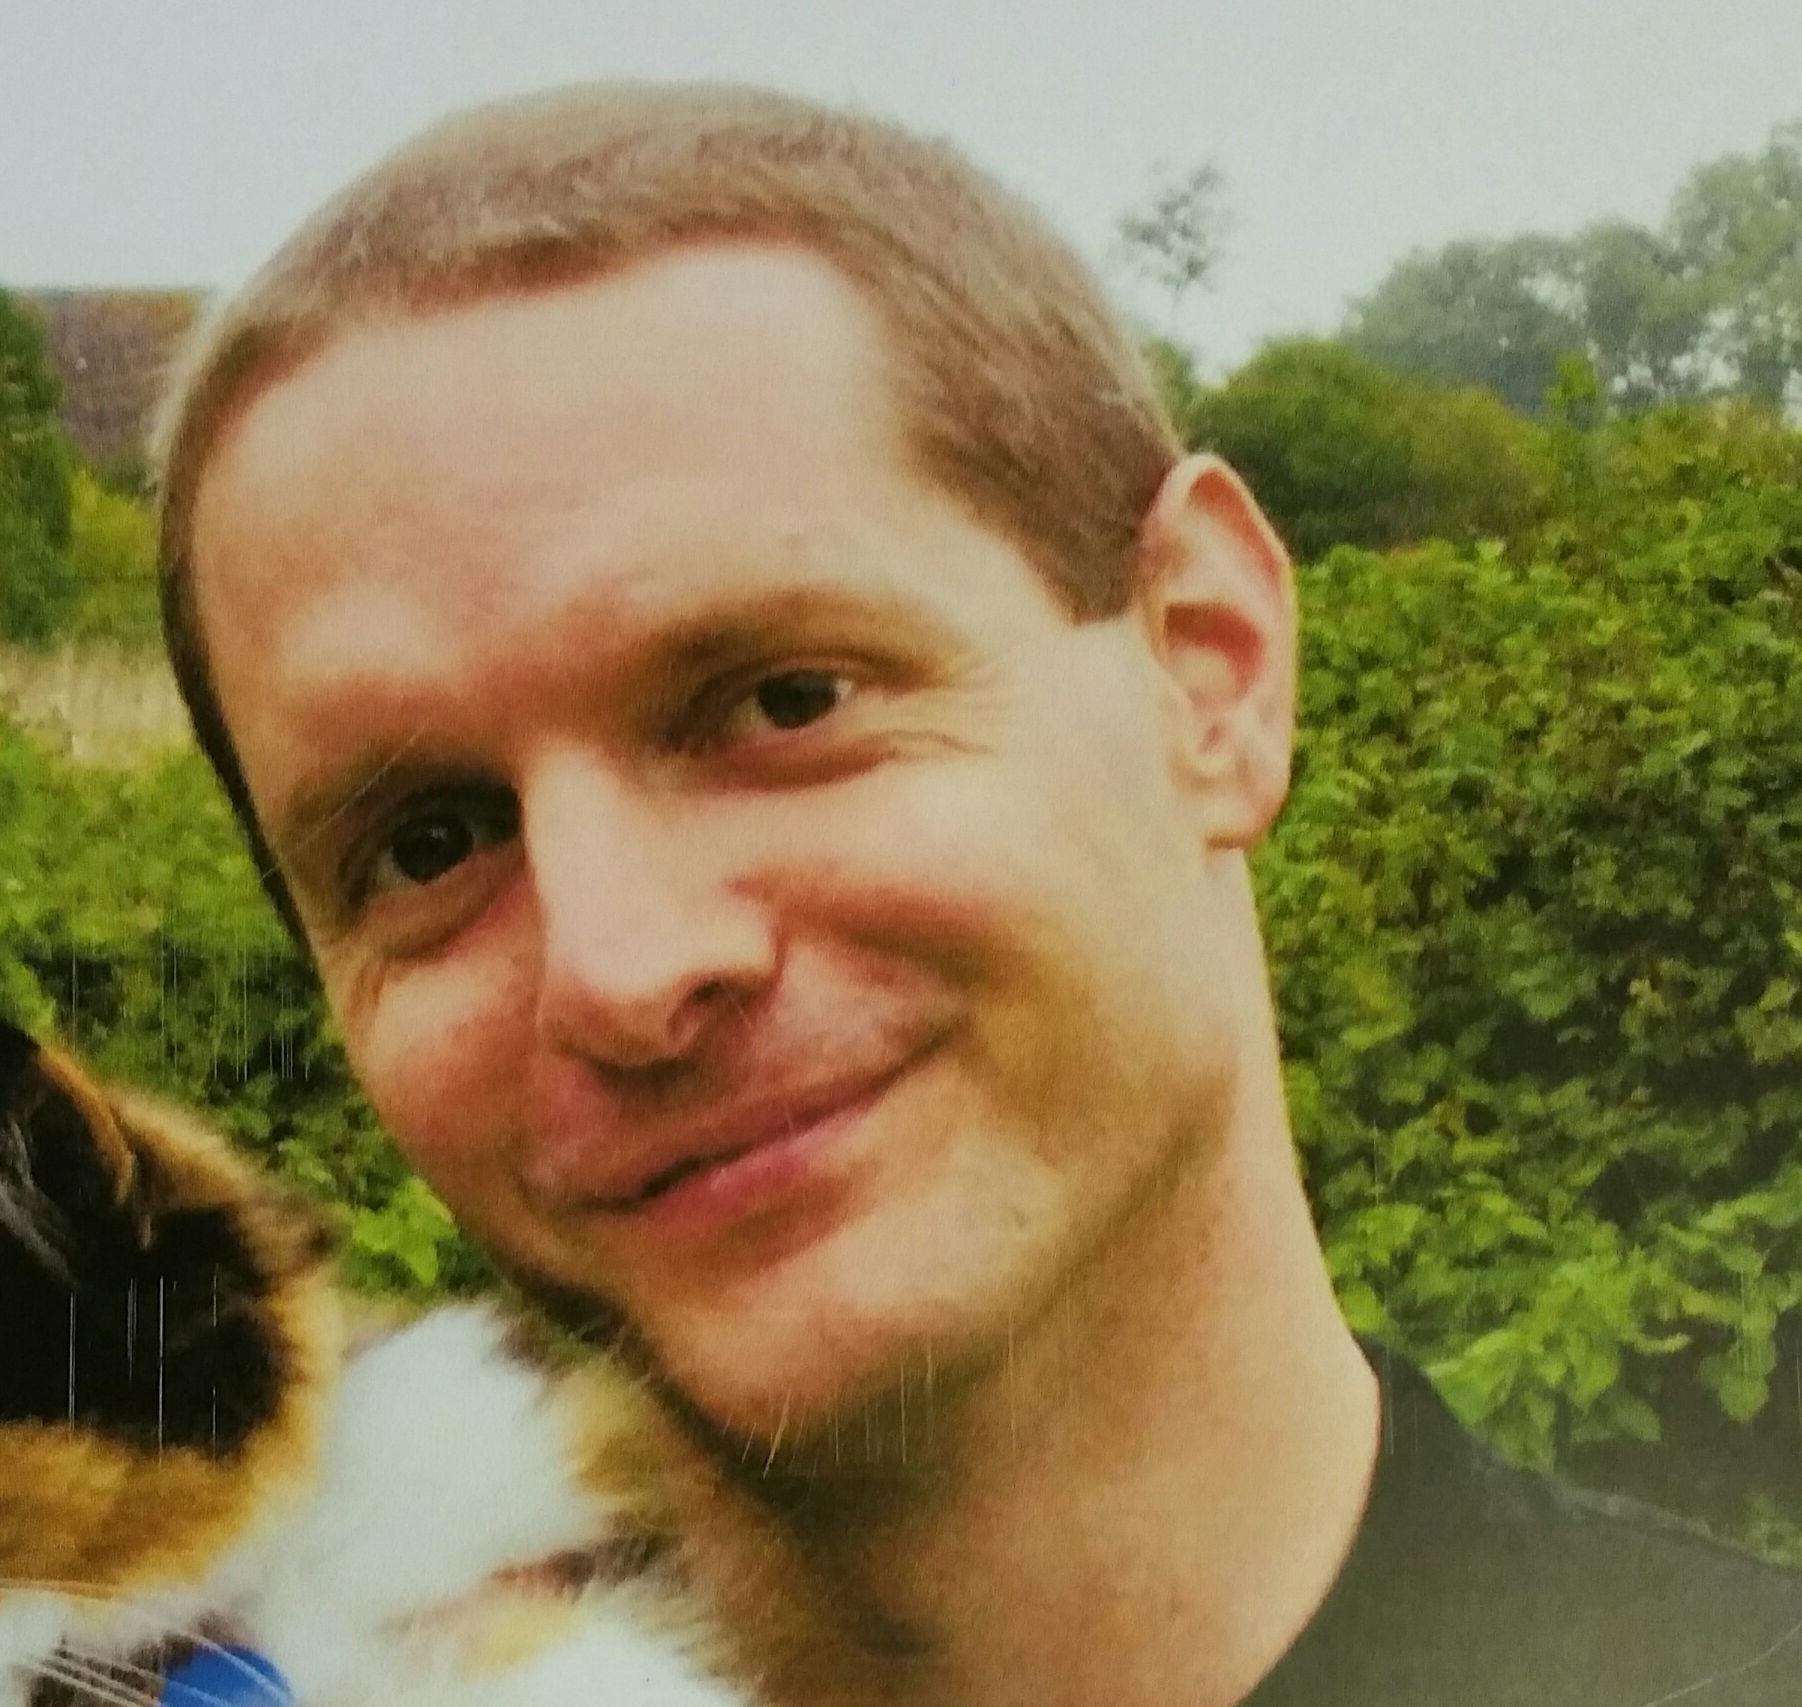 Robert Storey was reported missing